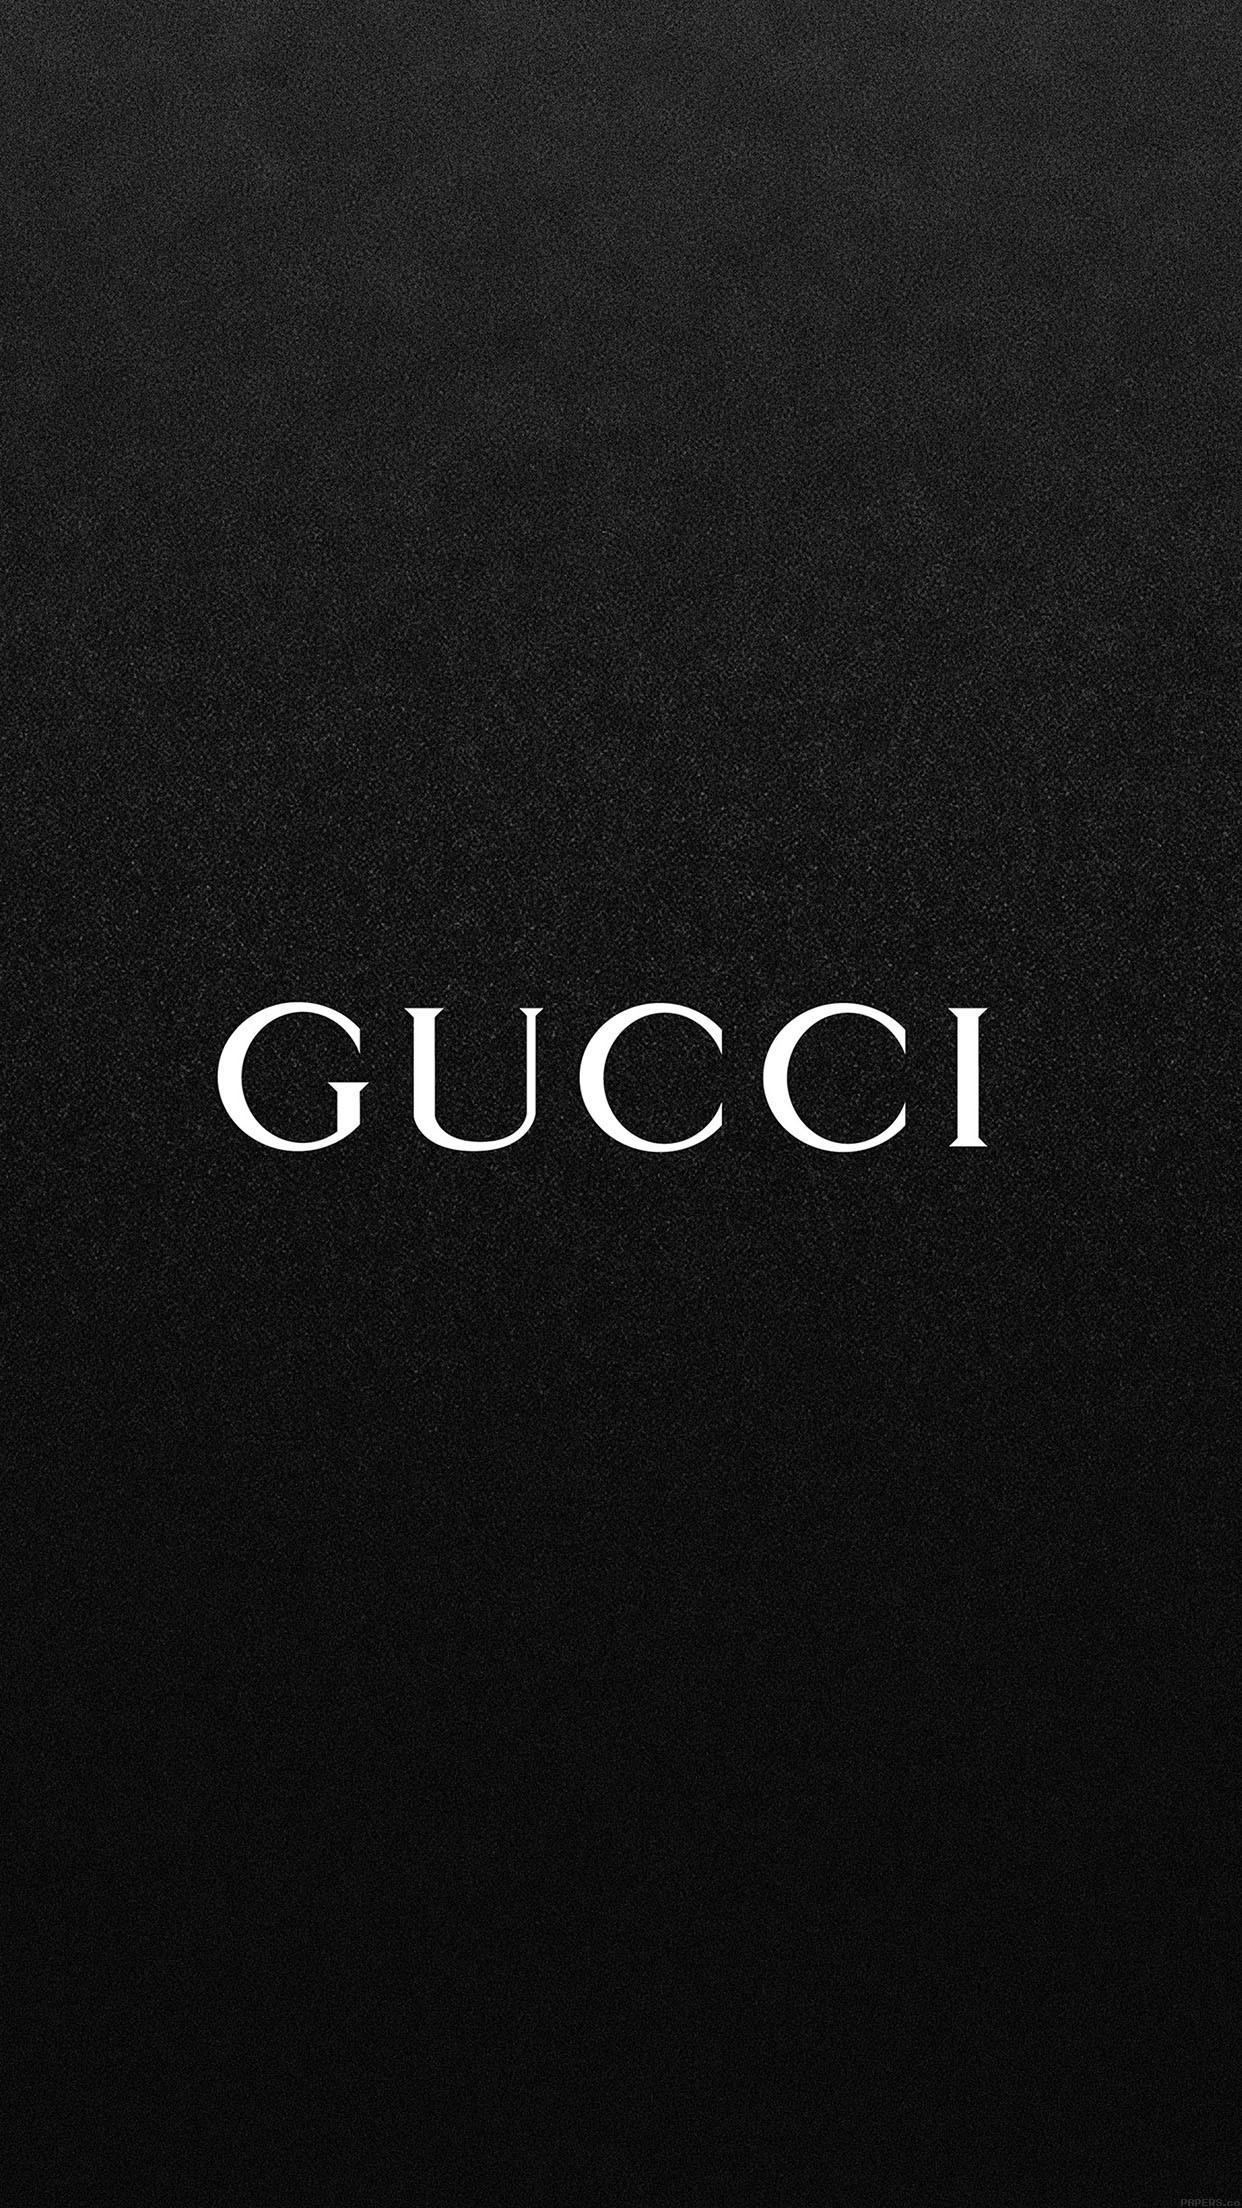 Luxury Gucci Wallpaper for iPhone X, 6 Download